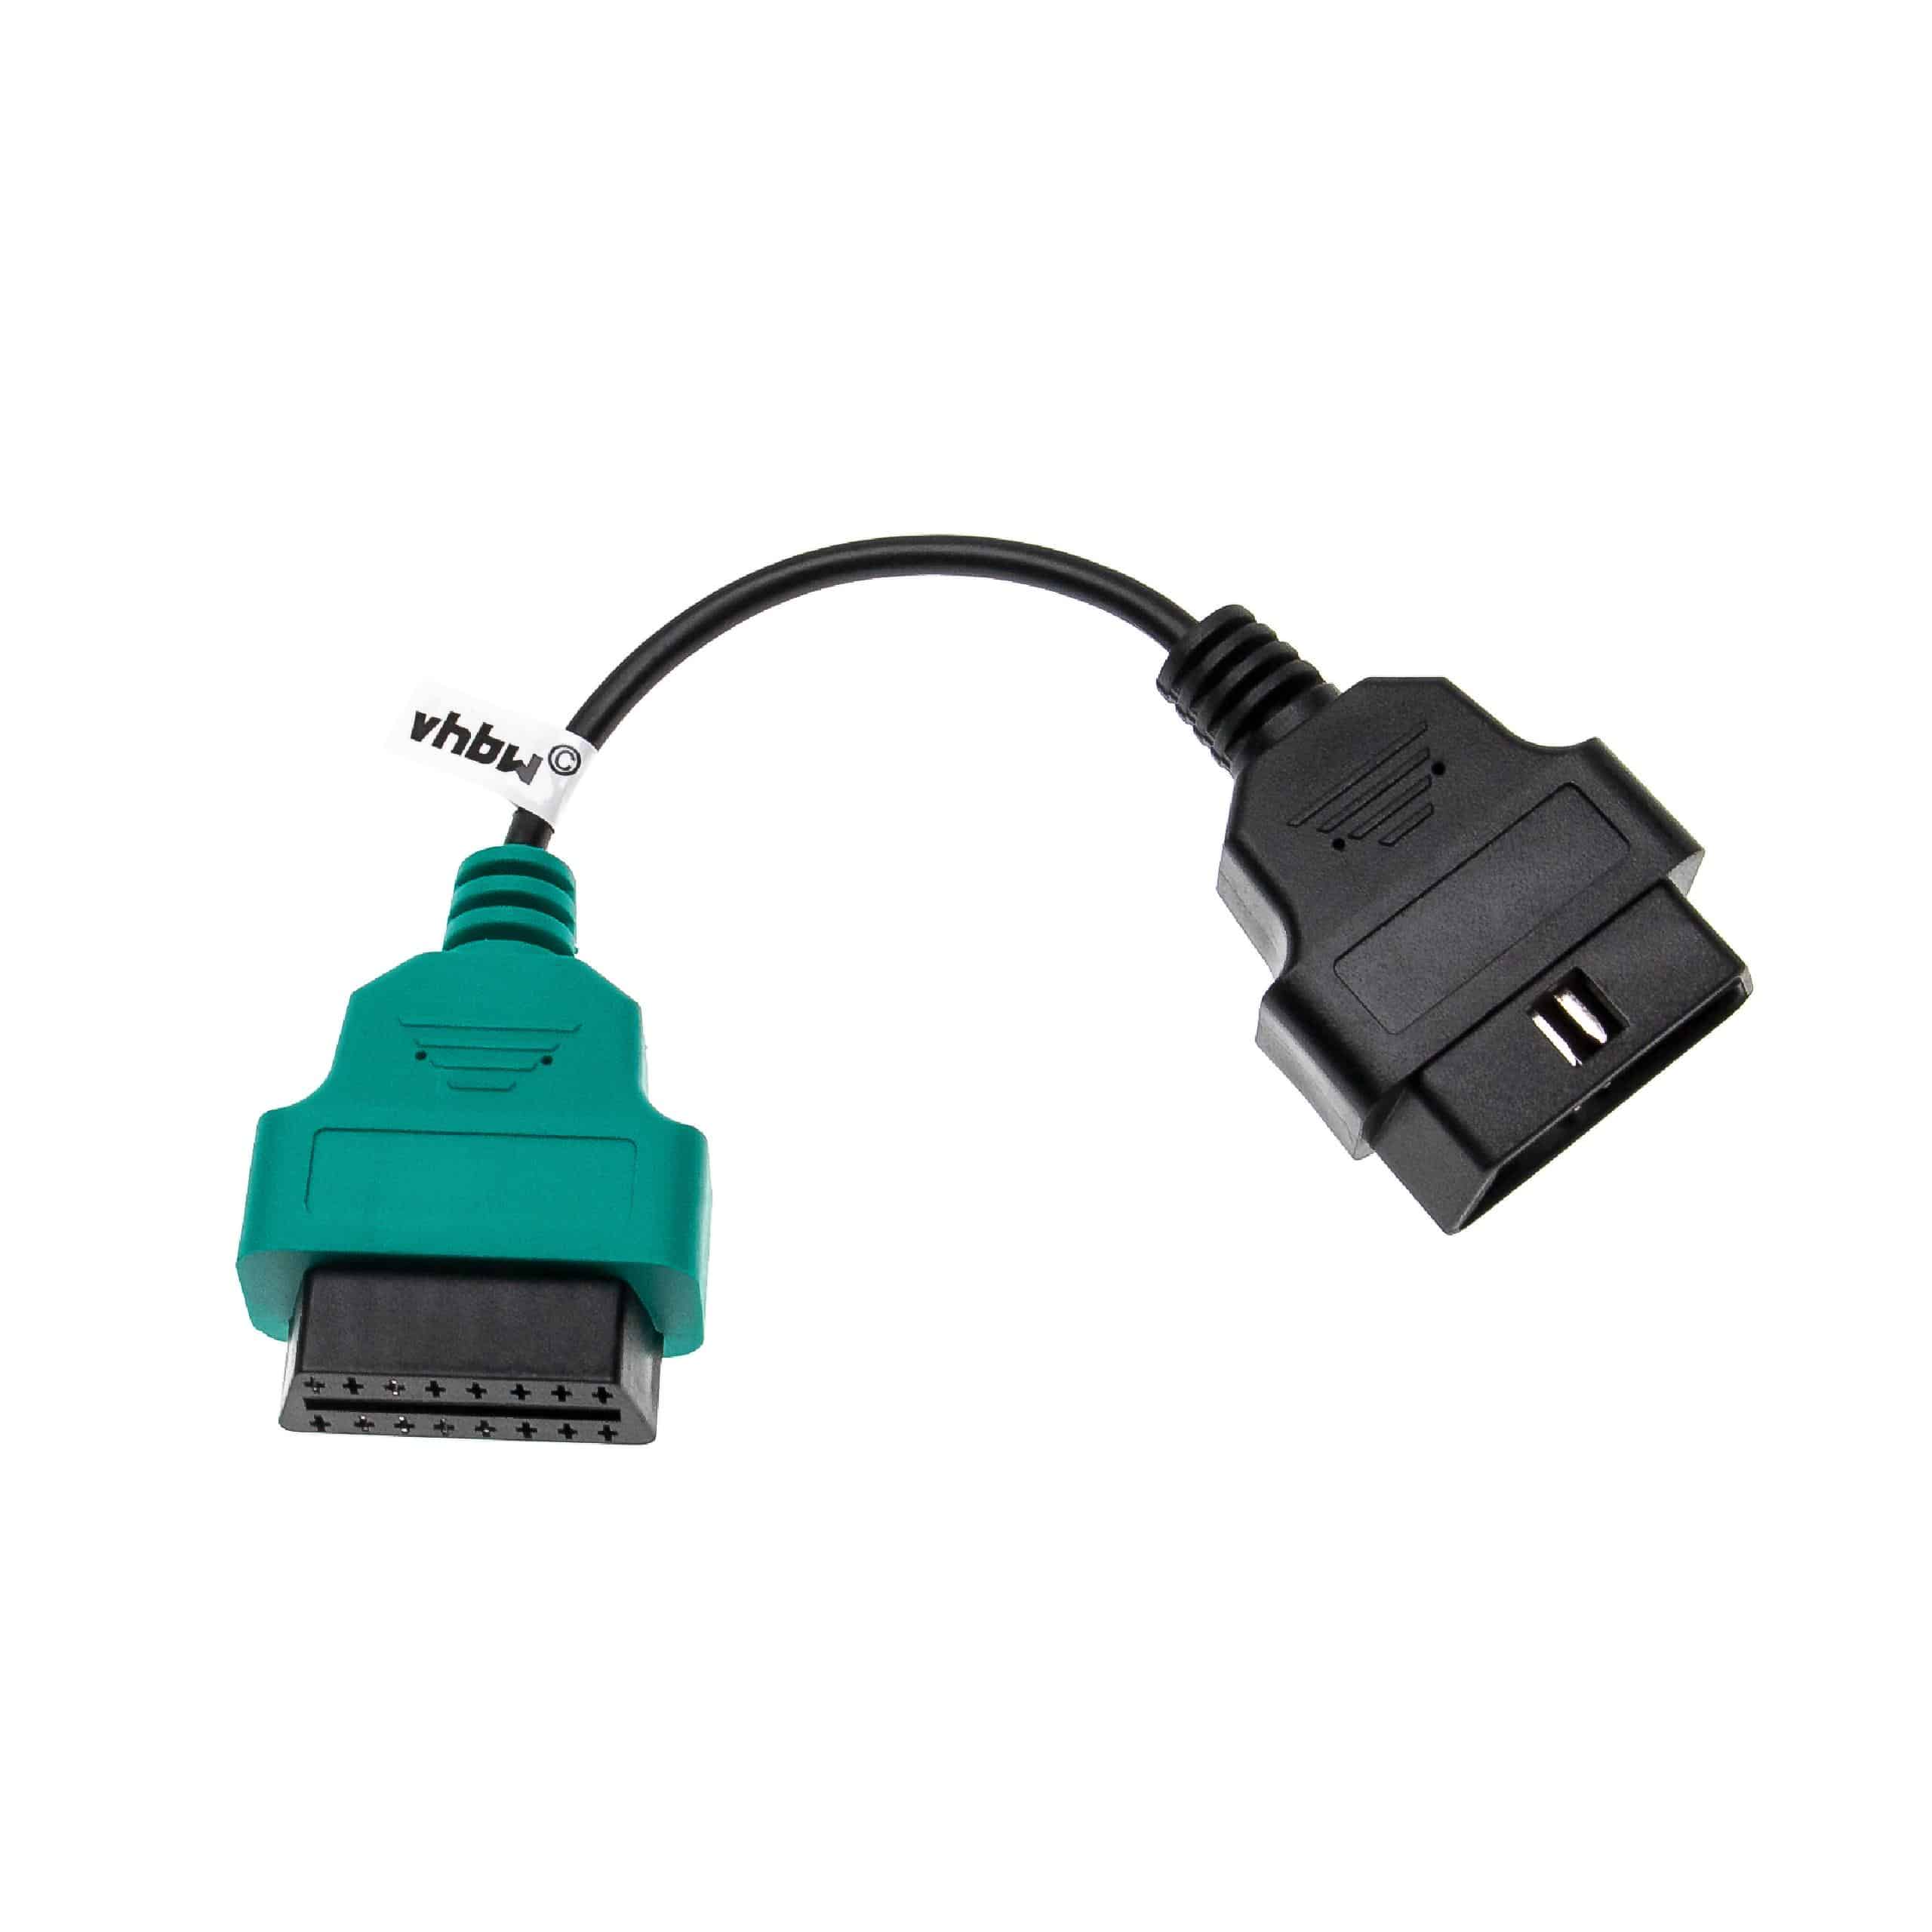 vhbw OBD2 Adapter A1 16Pin OBD1 to OBD2 suitable for GT Alfa Romeo, Fiat, Lancia GT Car, Vehicle - 22 cm